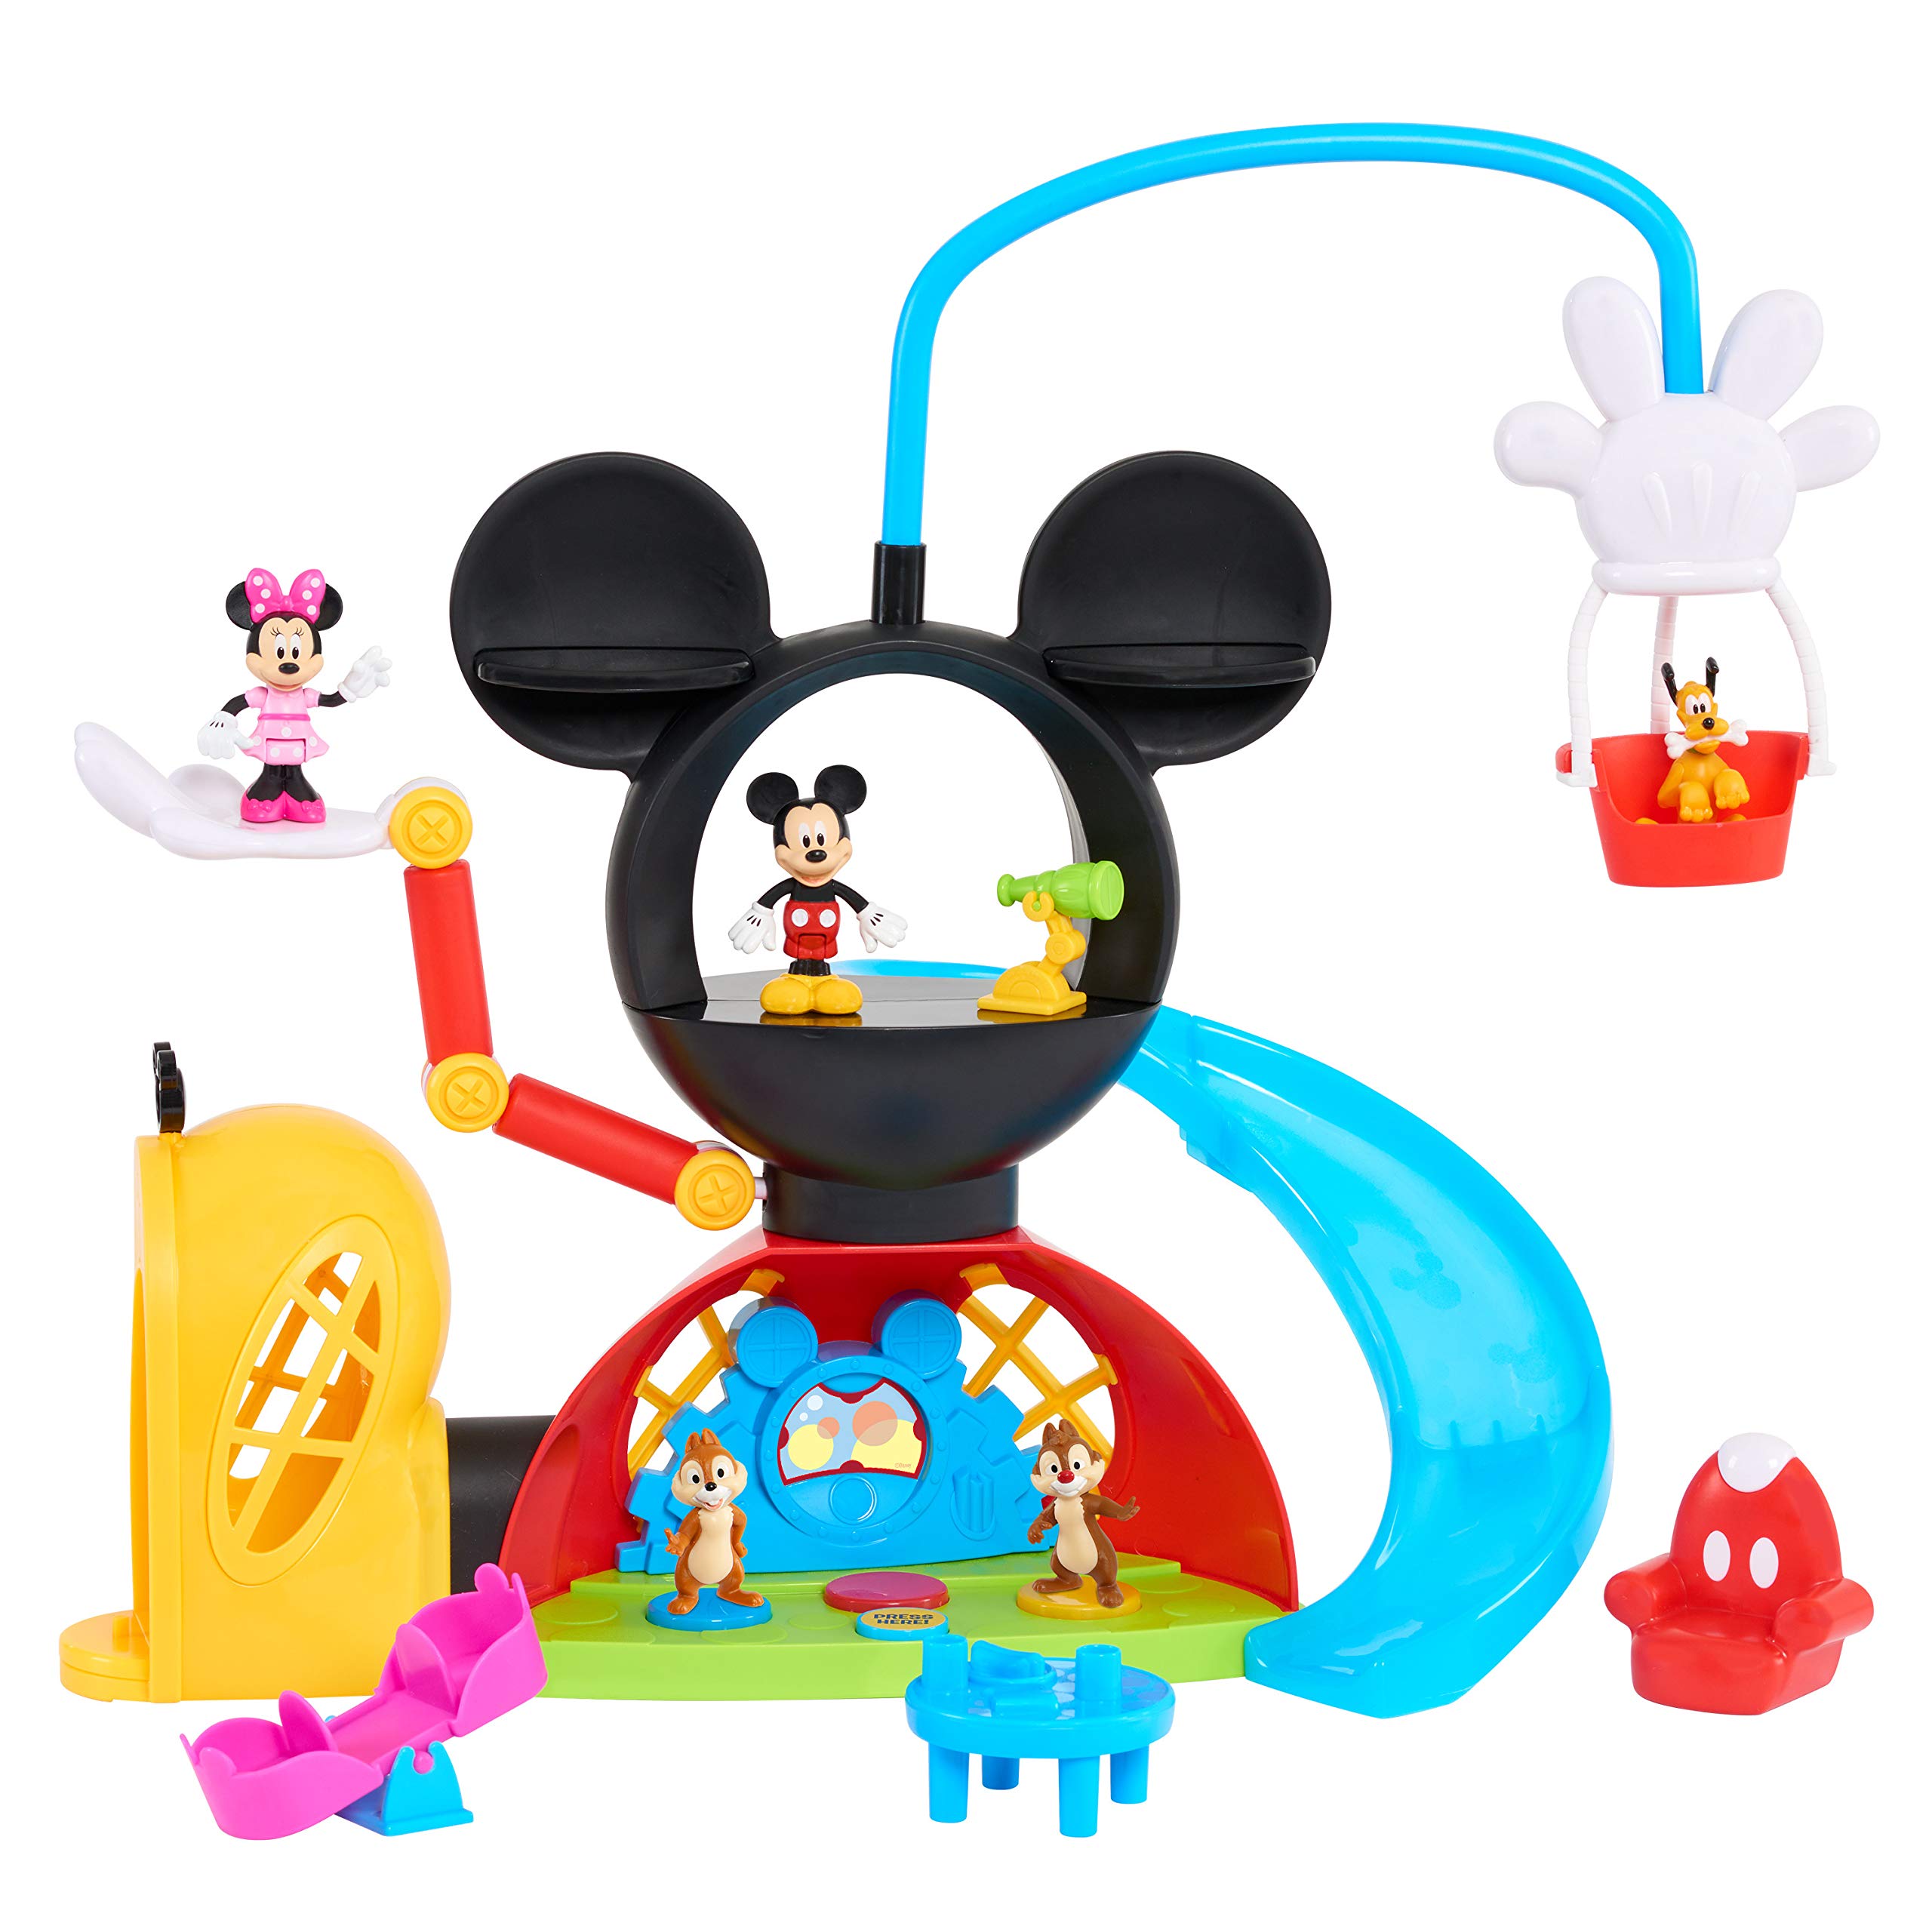 Mickey Mouse Clubhouse Adventures Playset with Bonus Figures, Officially Licensed Kids Toys for Ages 3 Up, Gifts and Presents by Just Play